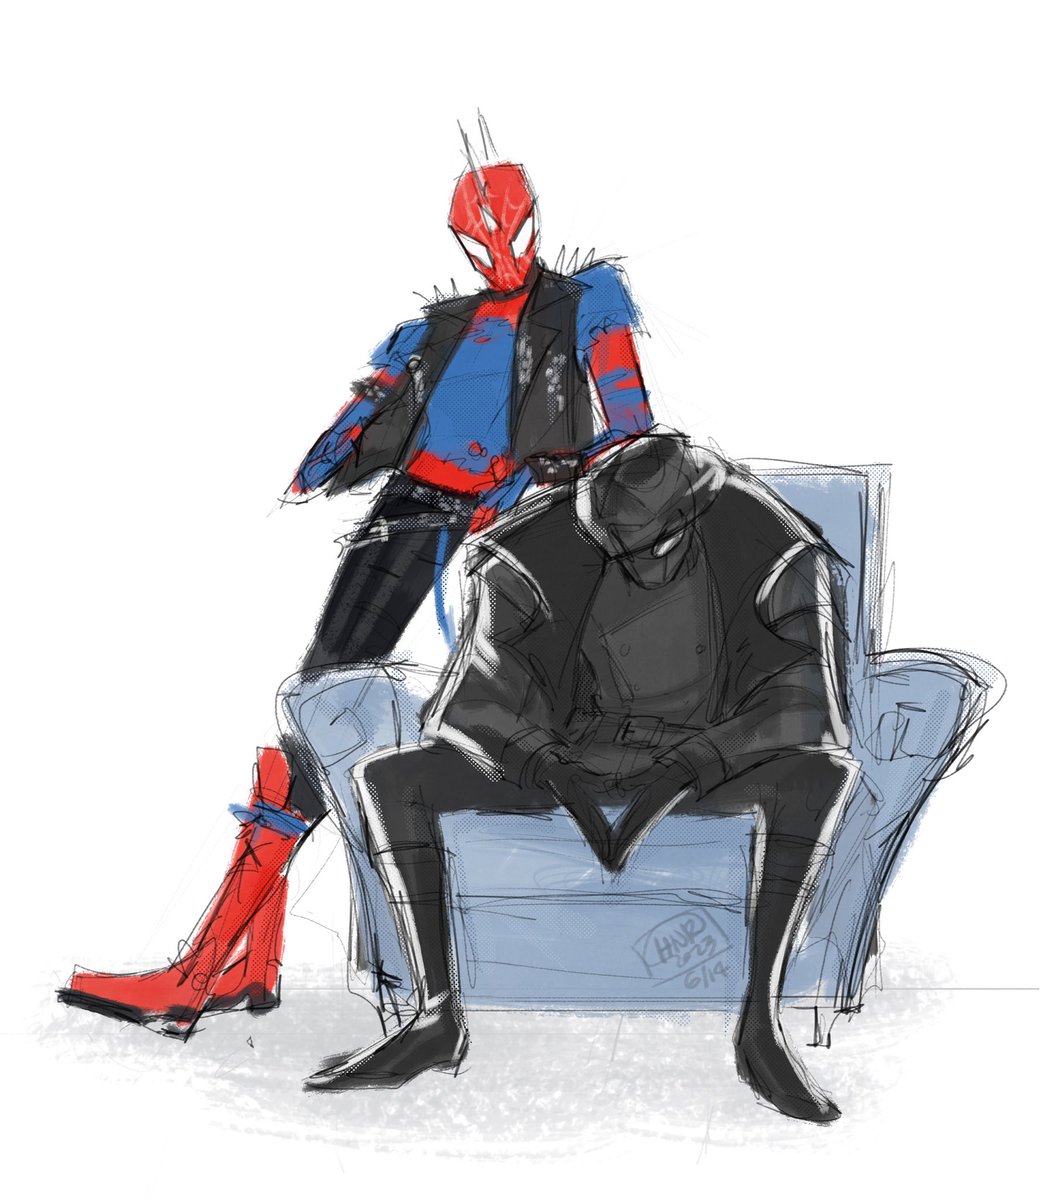 They would be besties

#AcrossTheSpiderVerse #SpiderVerse #spiderpunk #HobieBrown #spidermannoir #fanart